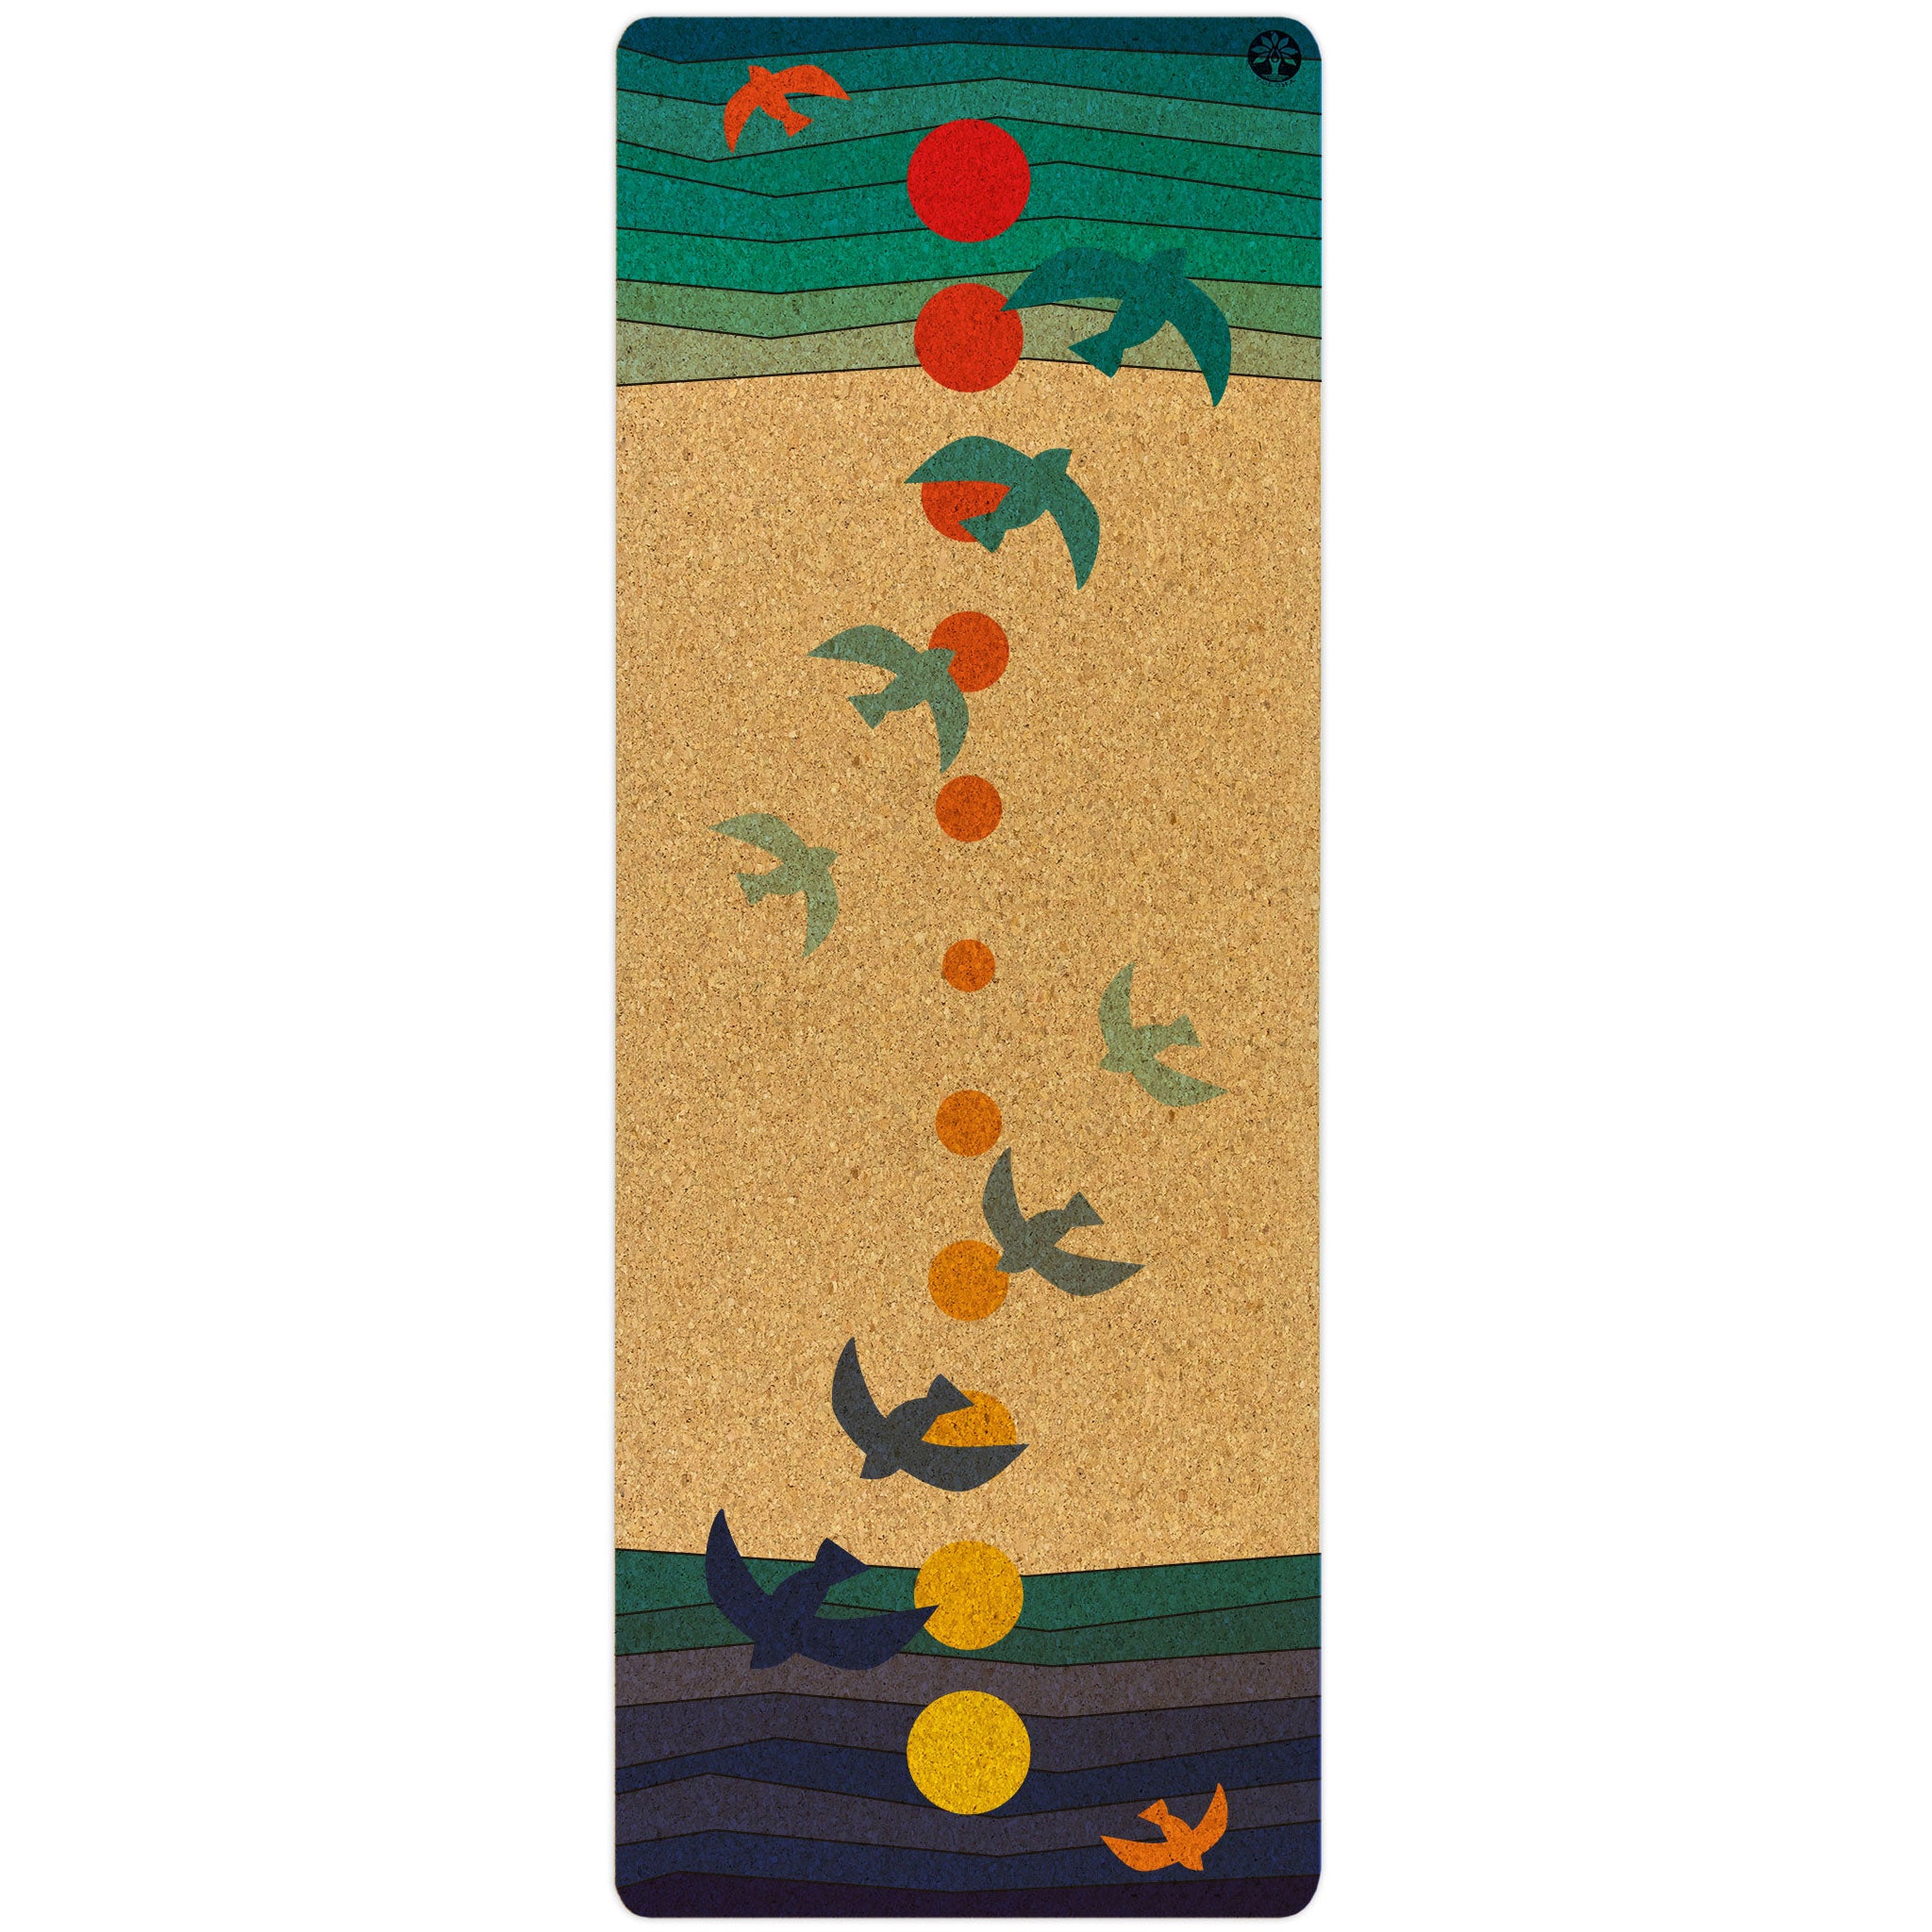 Splendor Of Love And Glory - Peacock Colorful Artwork Yoga Mat by